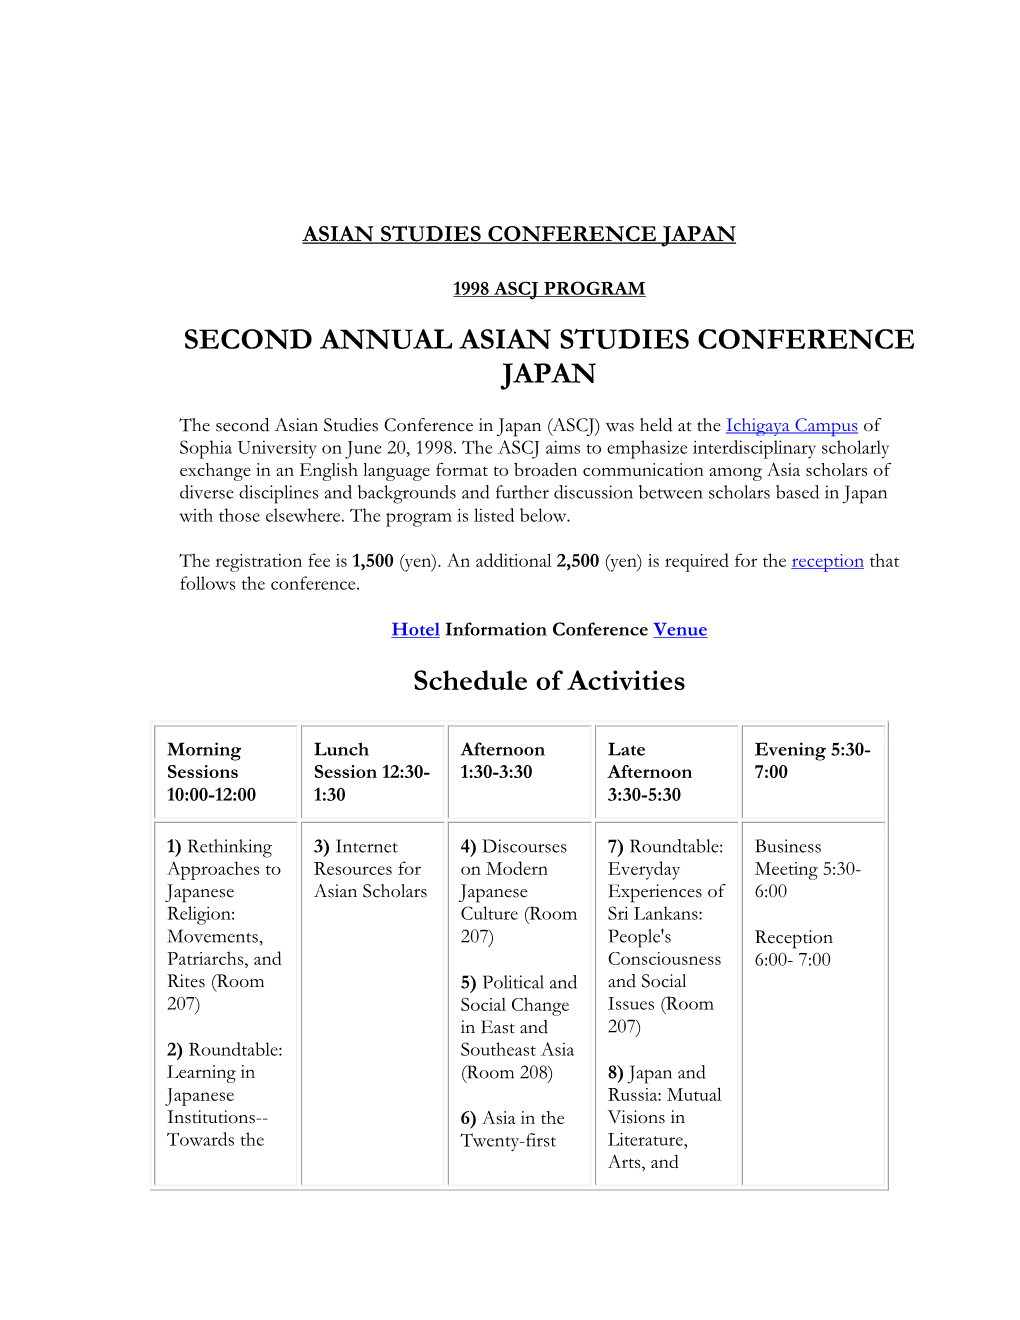 SECOND ANNUAL ASIAN STUDIES CONFERENCE JAPAN Schedule Of